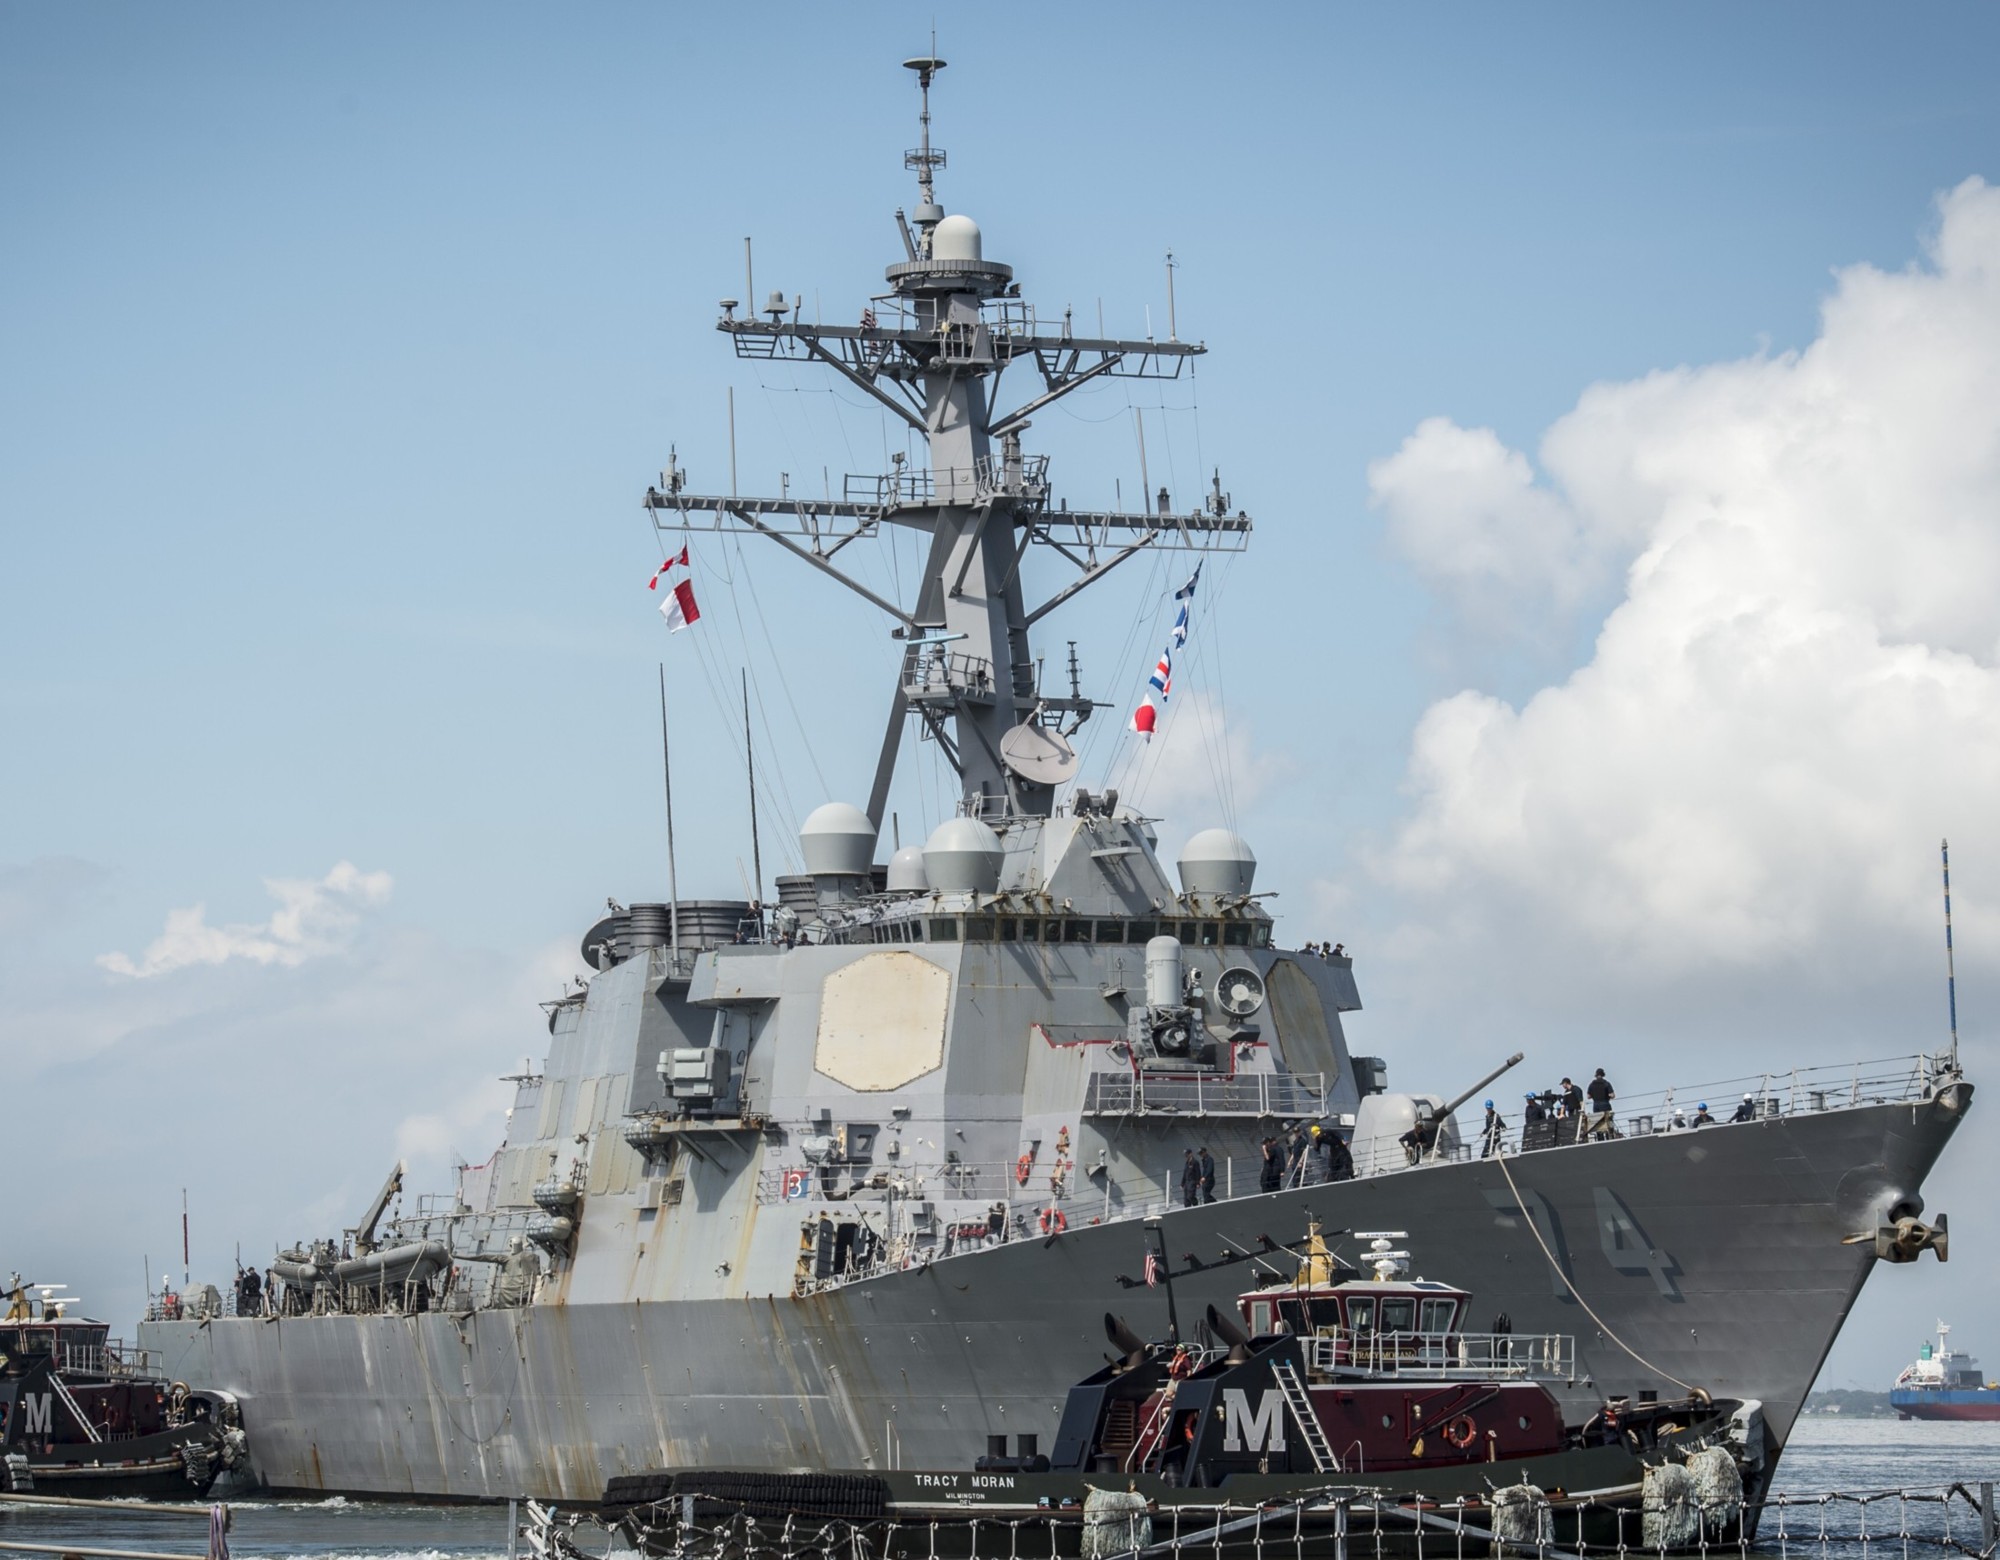 ddg-74 uss mcfaul guided missile destroyer arleigh burke class aegis bmd 22